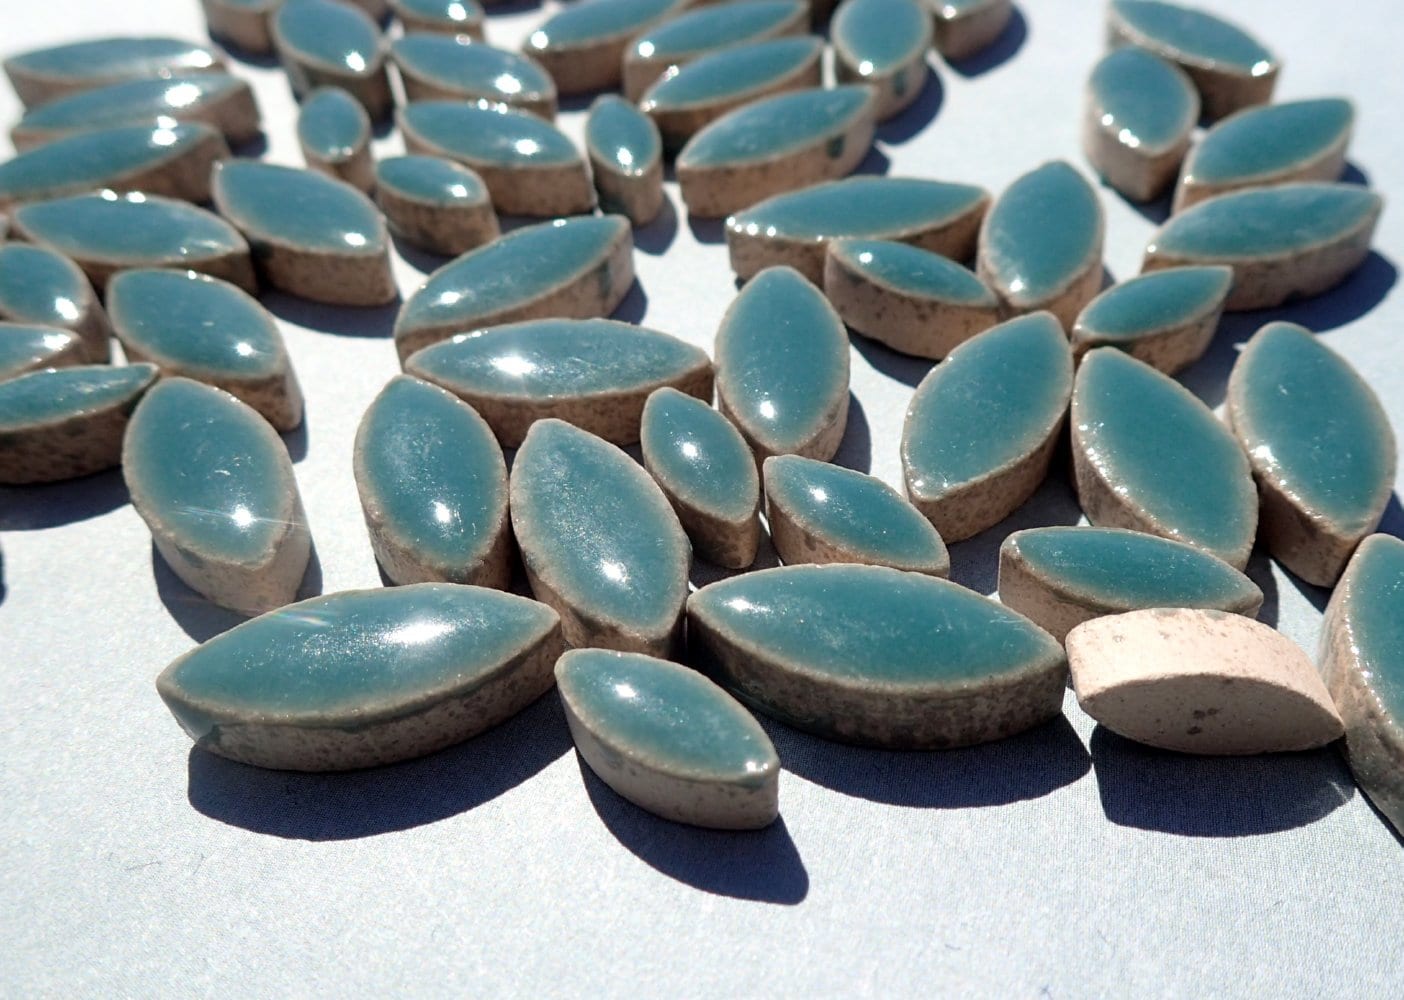 Sea Green Petals Mosaic Tiles - 50g Ceramic Leaves in Mix of 2 Sizes 1/2" and 3/4" - Phthalo Green